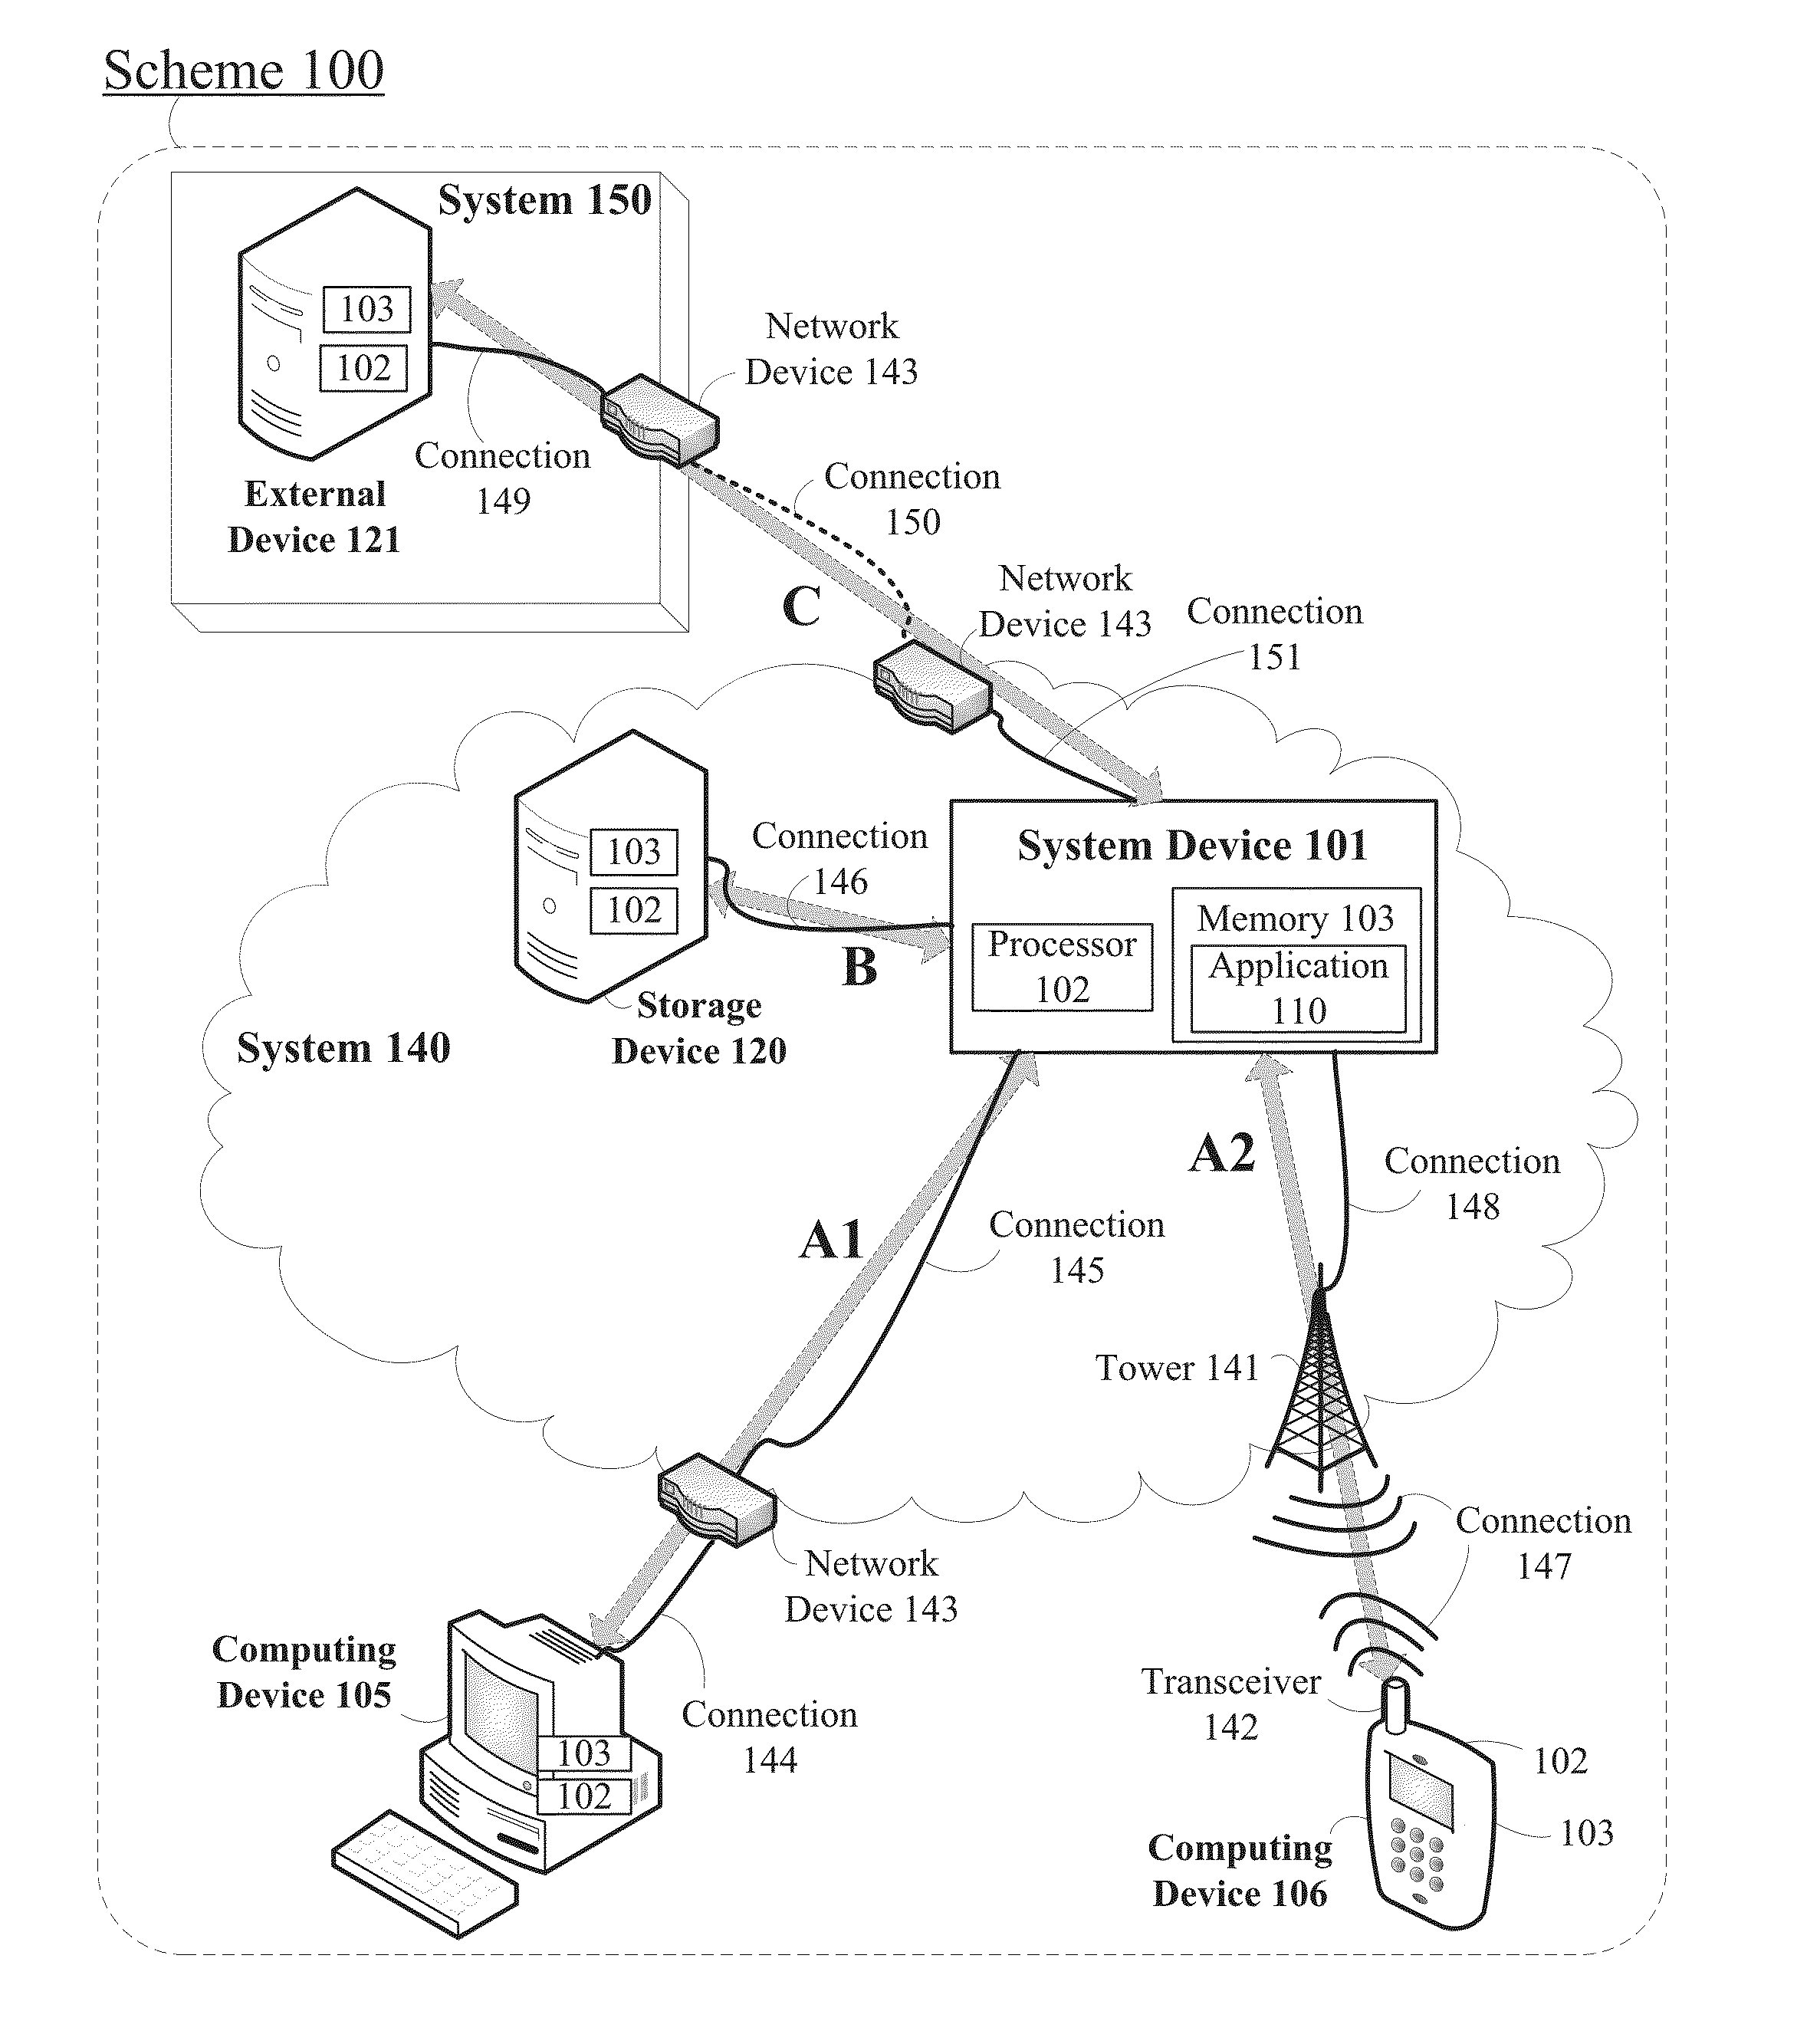 Occupational specialty and classification code decoding and matching method and system